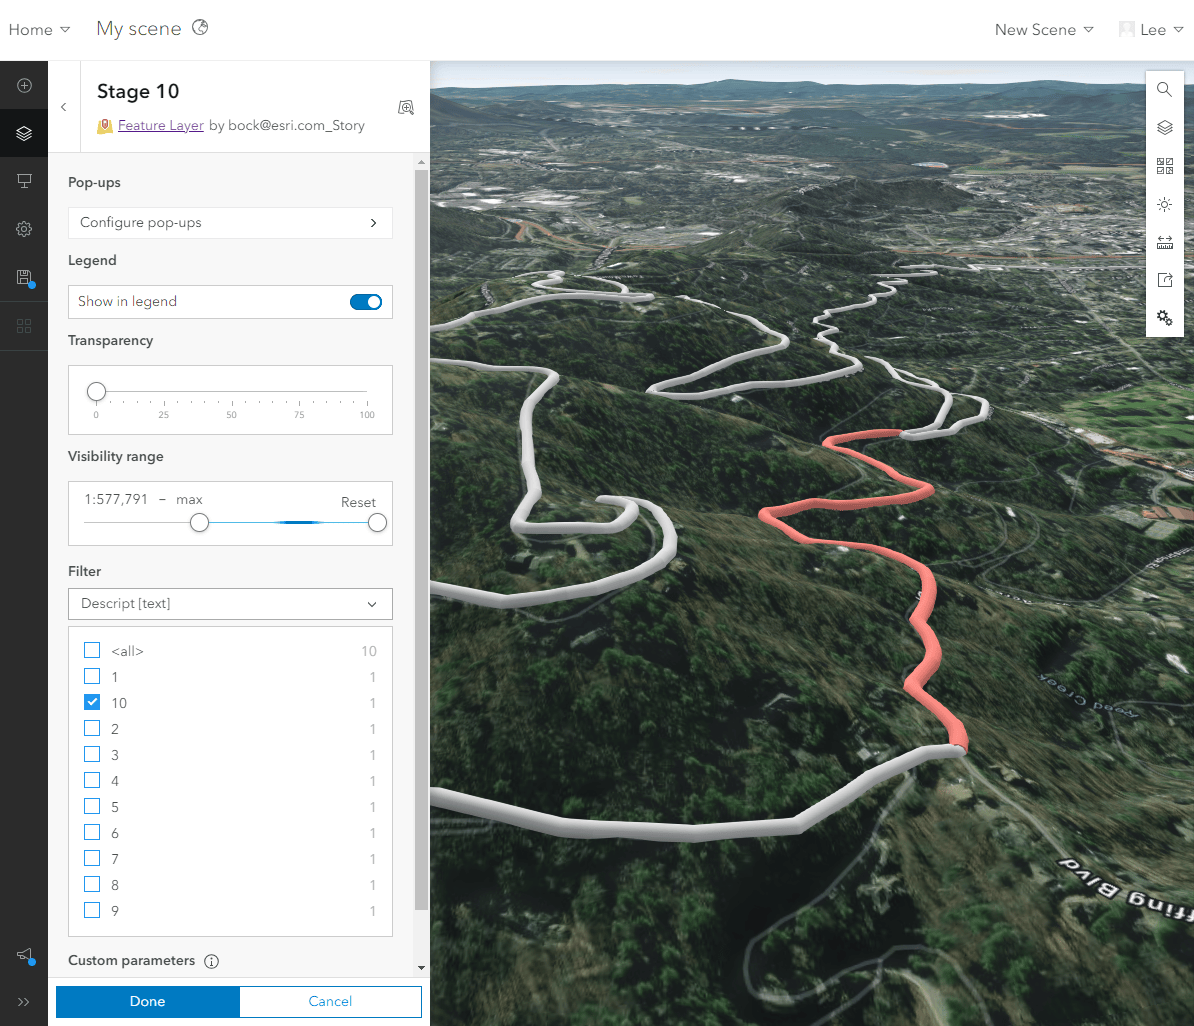 screen shot of ArcGIS Scene Viewer with the Layer Properties menu open. In the Filter section, the selected category is Desript, and the Descript value 10 is selected.